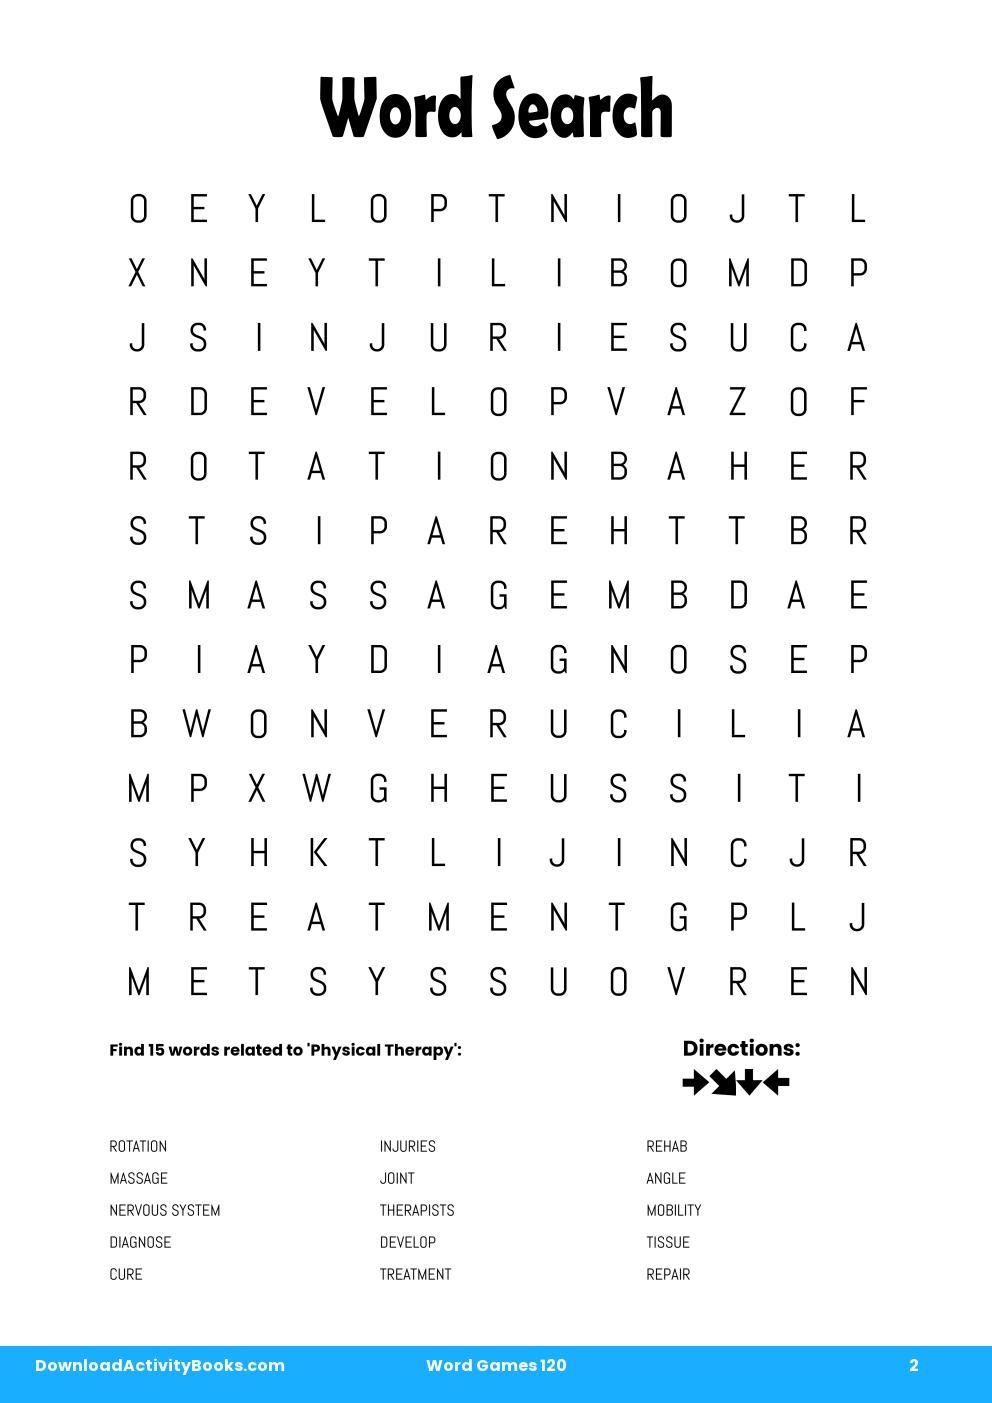 Word Search in Word Games 120